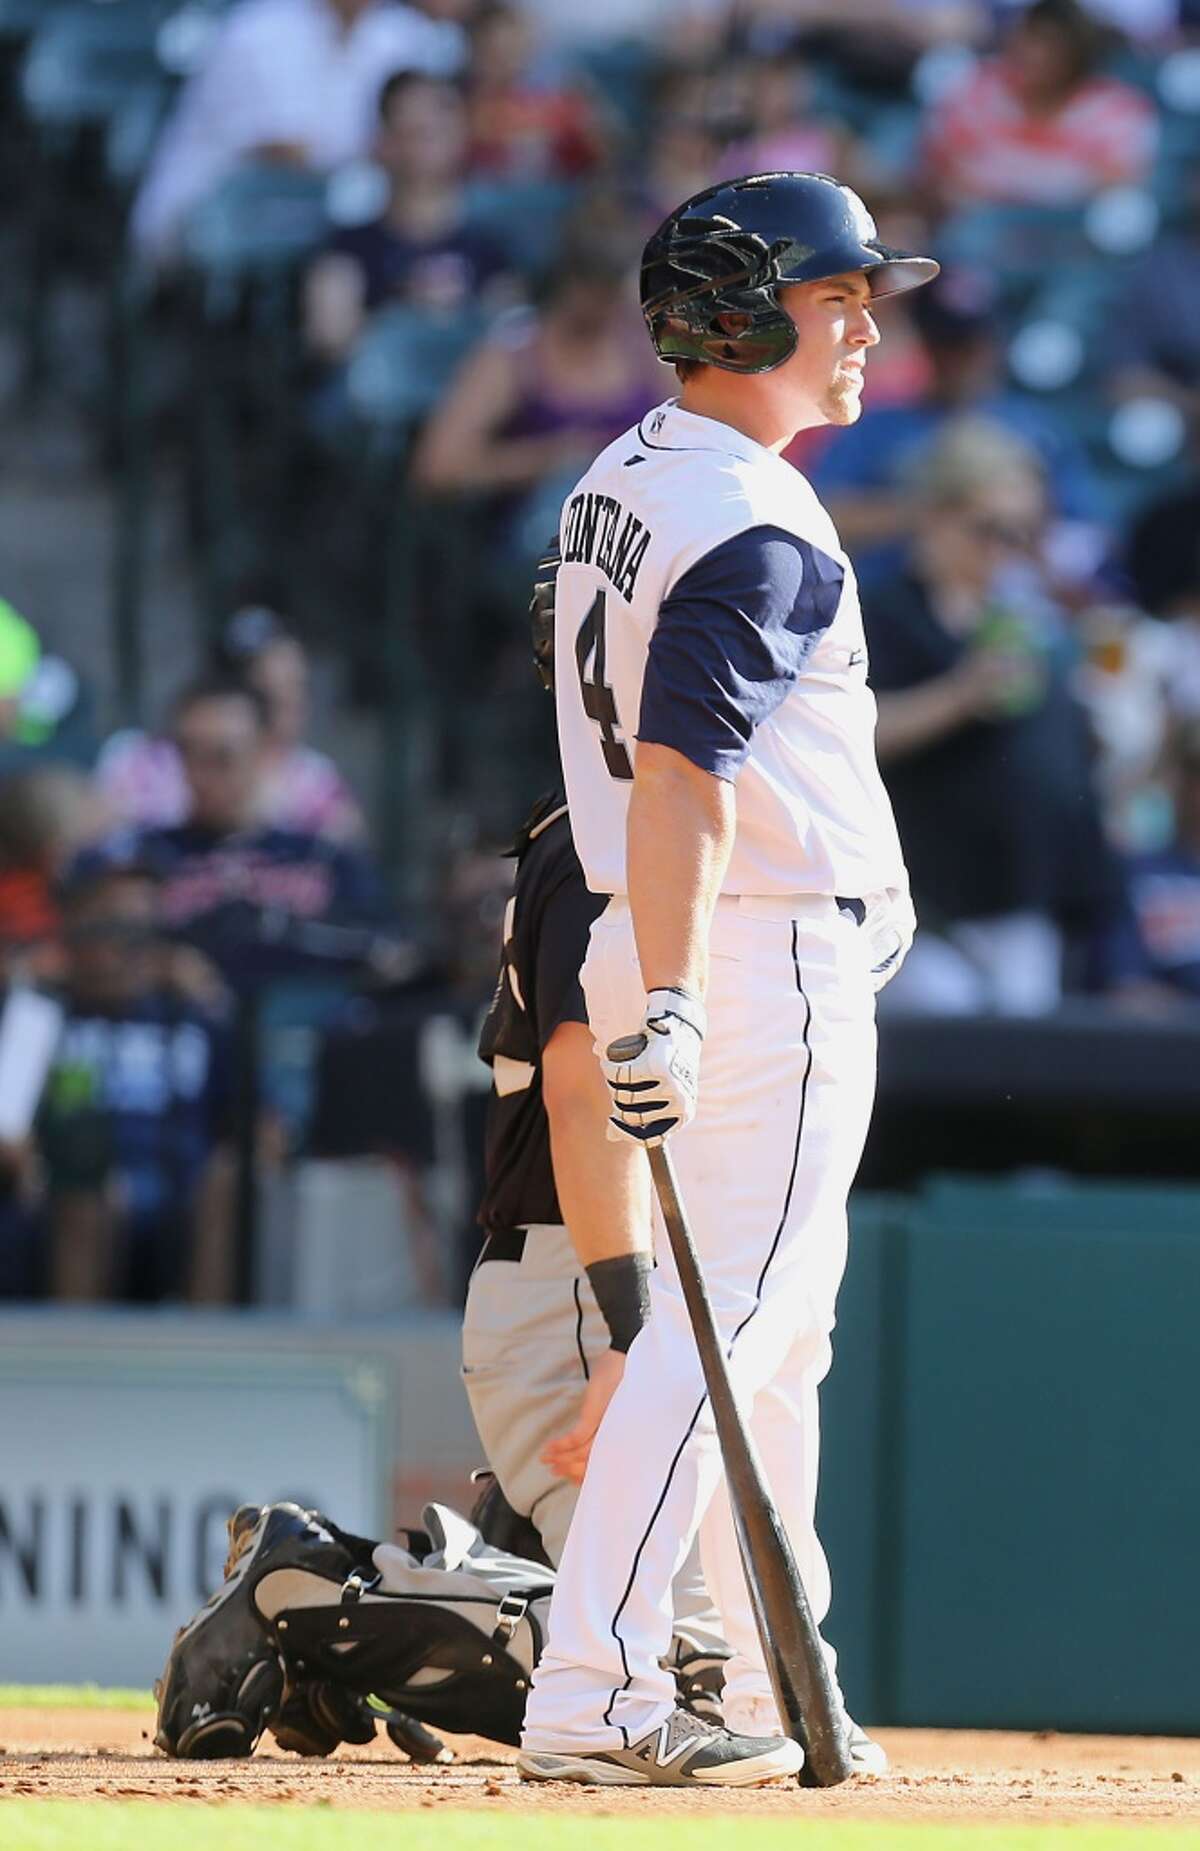 Corpus Christi Hooks Nolan Fontana stands in the batters box during the first inning of the Minor League Baseball game against the San Antonio Missions at Minute Maid Park Tuesday, June 10, 2014, in Houston. ( James Nielsen / Houston Chronicle )